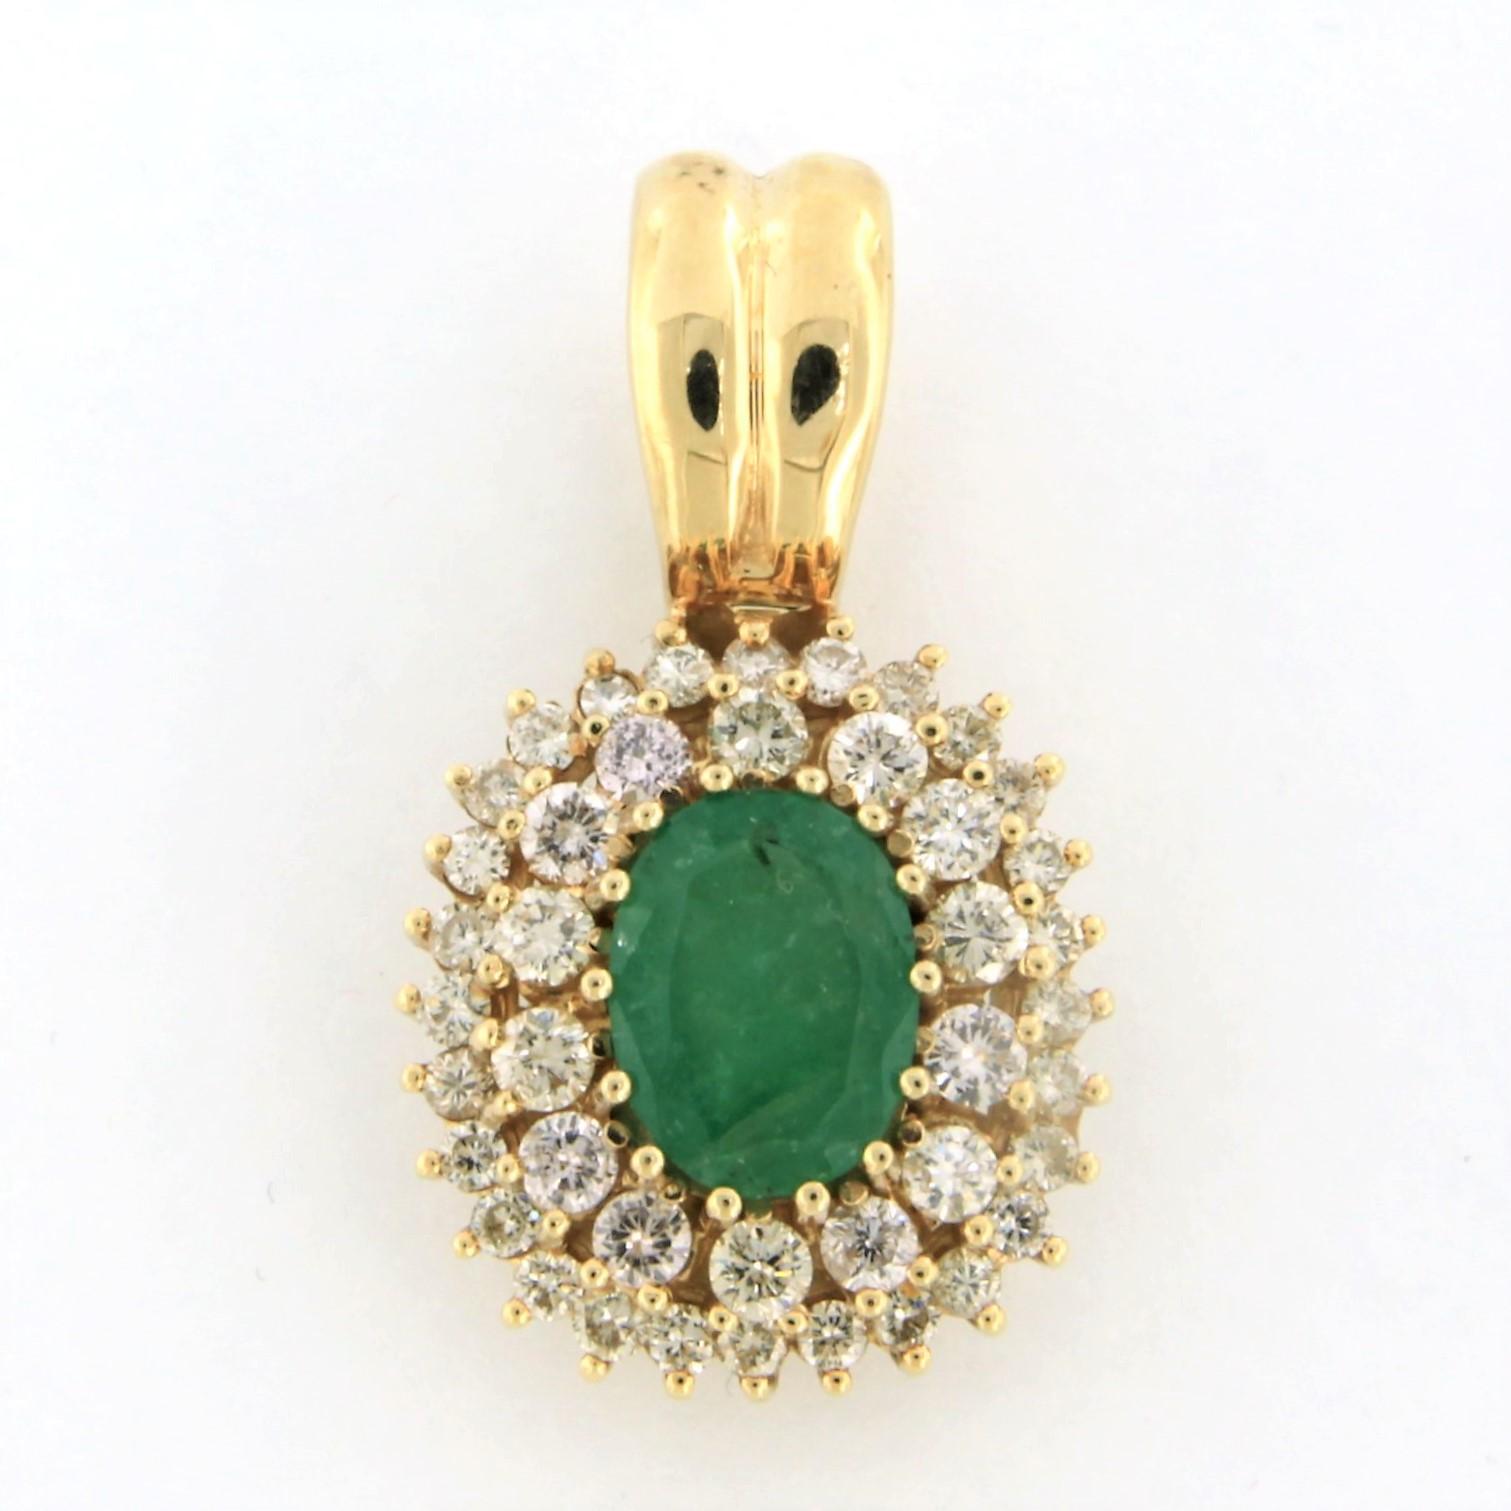 14k yellow gold pendant set with emerald and brilliant cut diamonds. 1.00ct – H/I – VS/SI

Detailed description:

the size of the pendant is 2.8 cm long by 1.5 cm wide

Total weight 6.2 grams

set with

- 1 x 8.6 mm x 6.3 mm oval facet cut